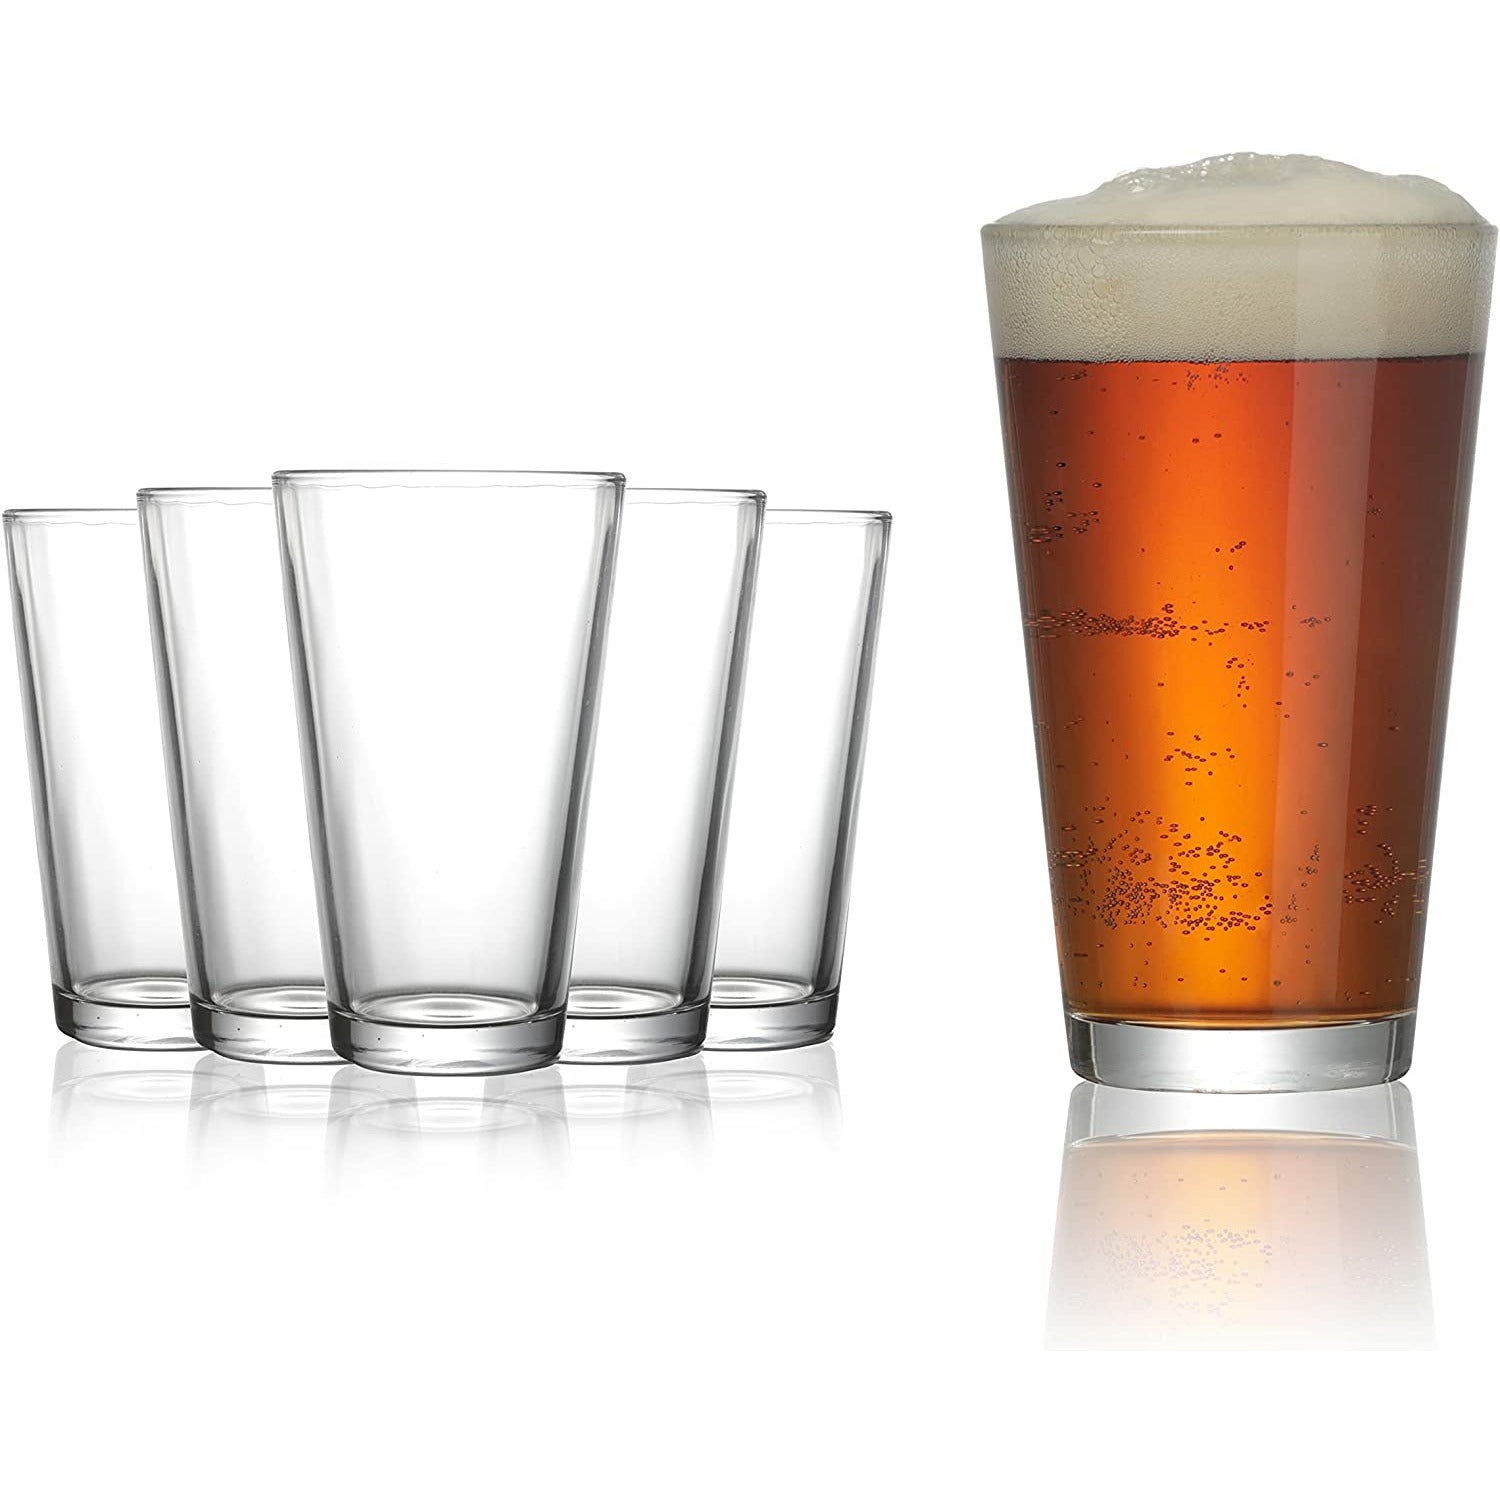 Pint Glasses Set of 6 - 16 oz Drinking Glasses Made for Cold Beverages - 16  oz Mixing Glass & Highba…See more Pint Glasses Set of 6 - 16 oz Drinking